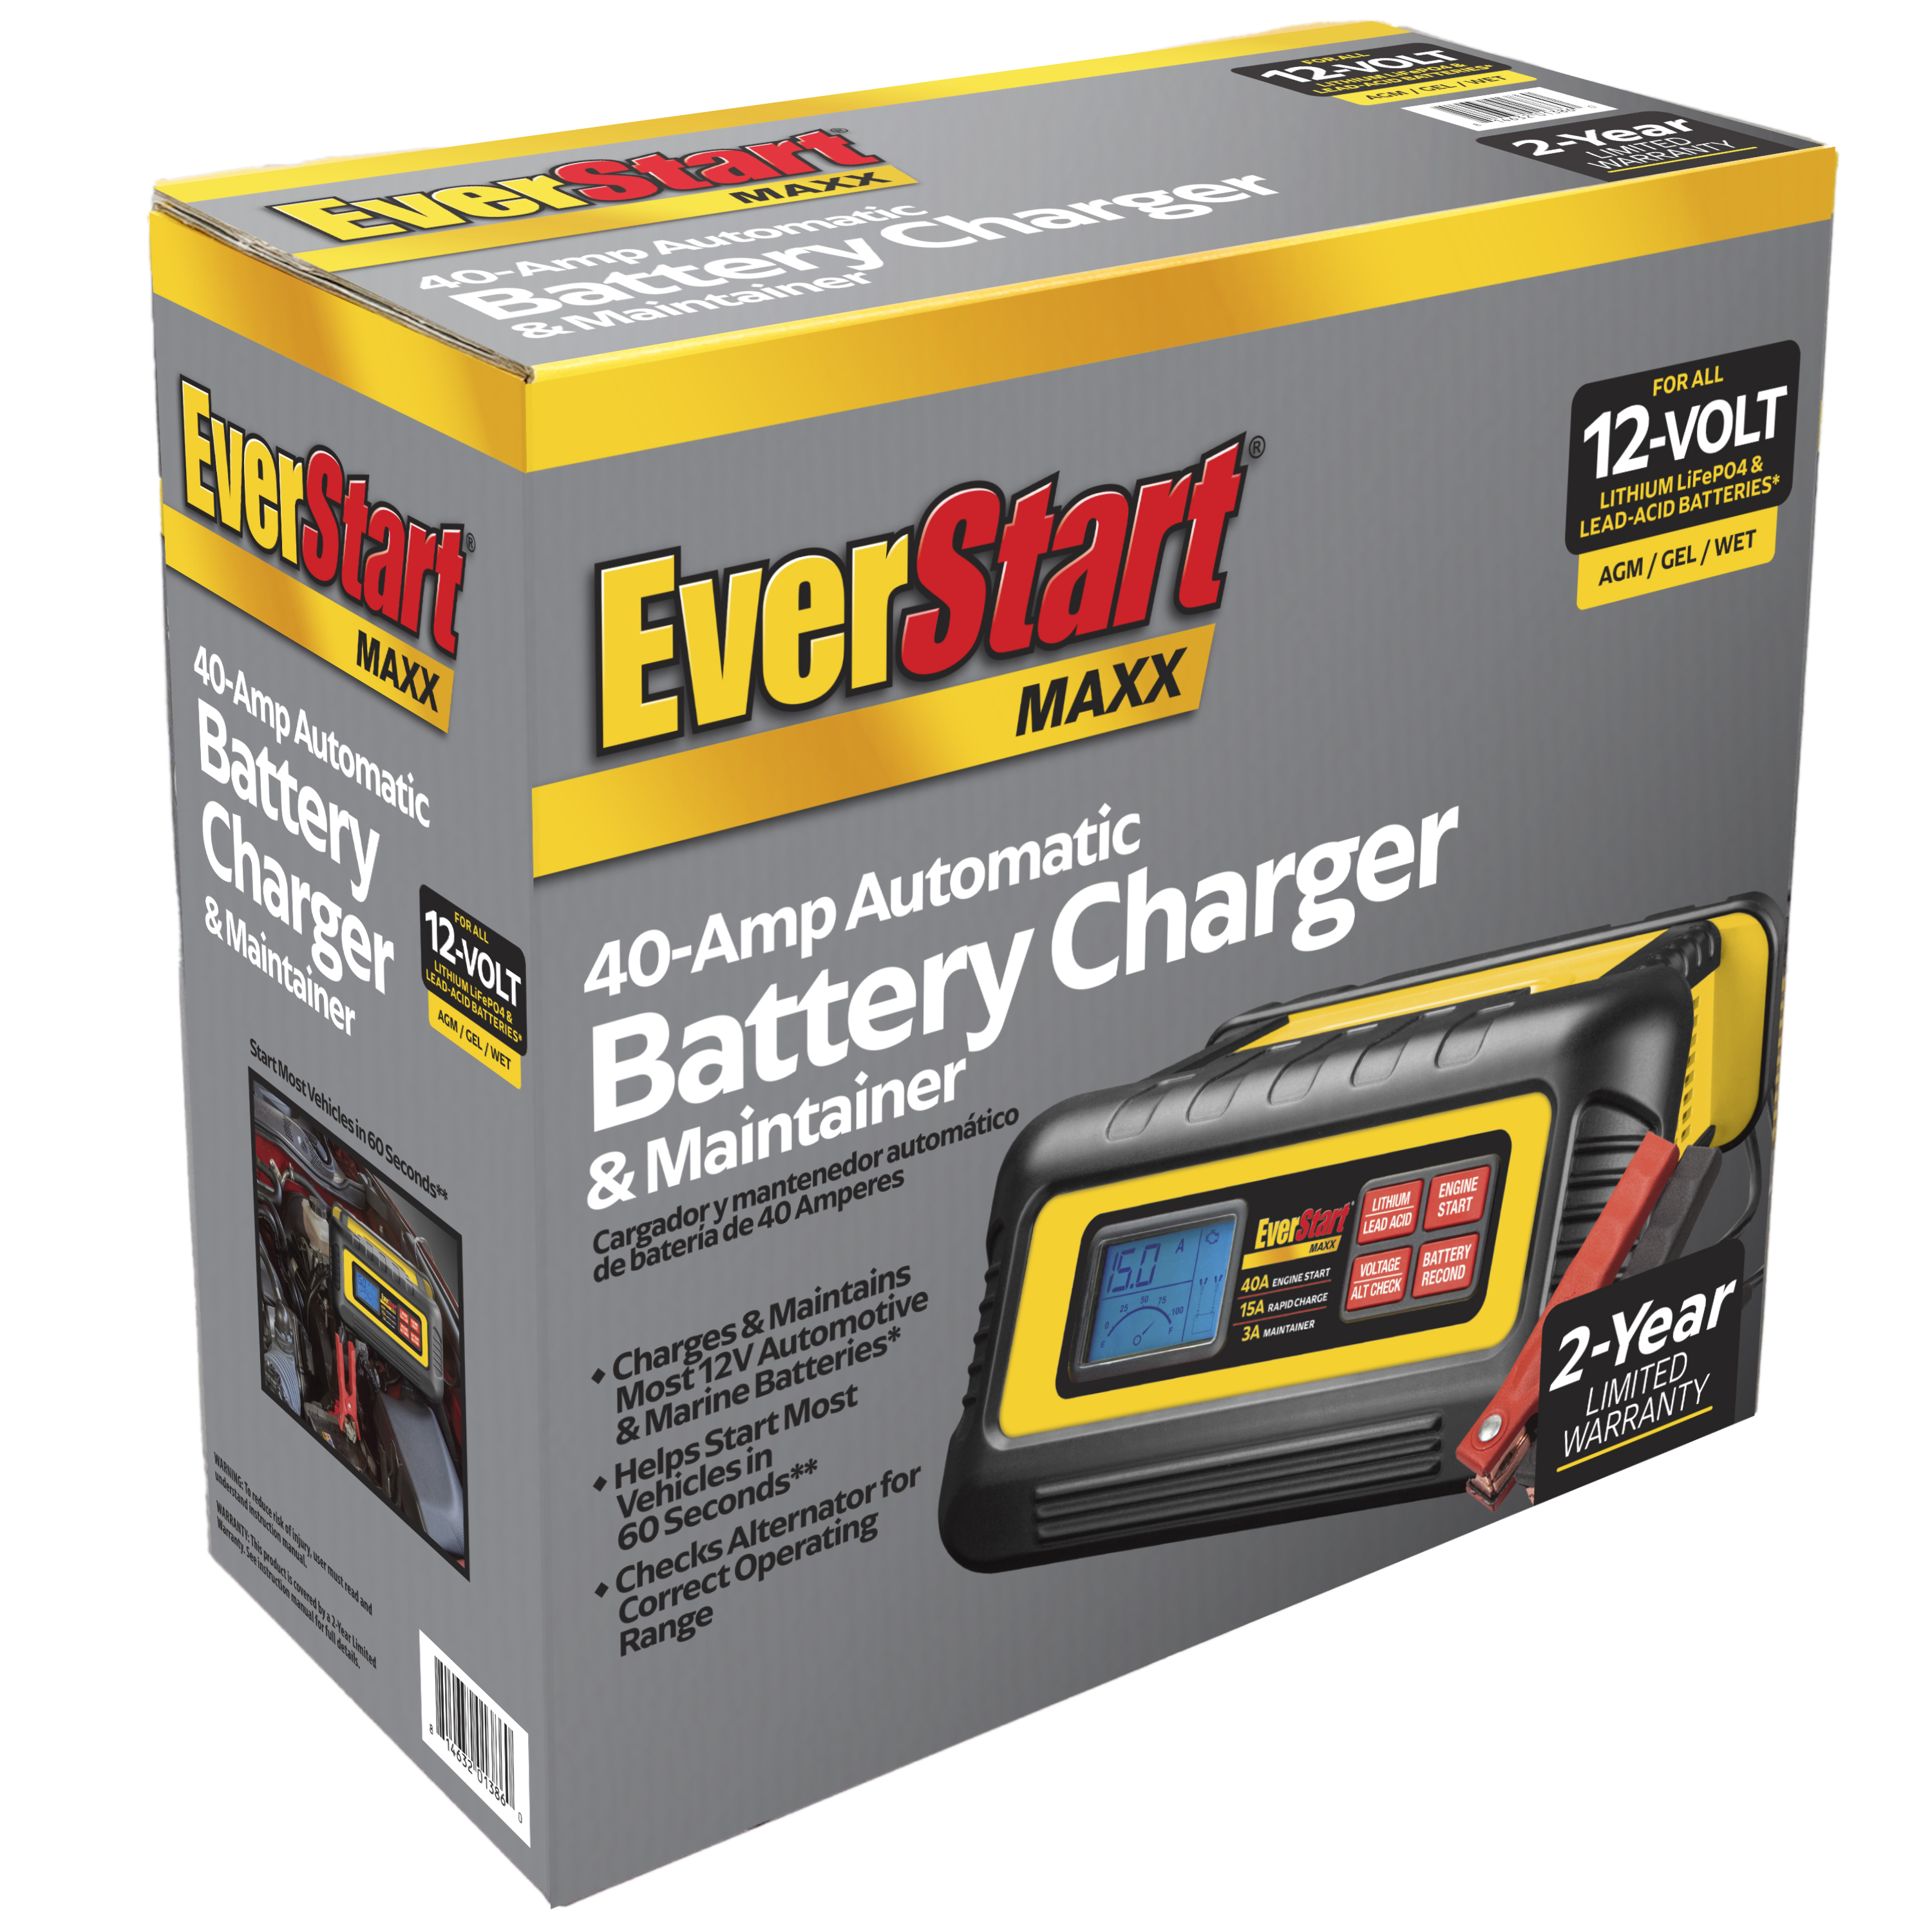 EverStart Maxx 15 Amp Battery Charger and Maintainer with 40 Amp Engine Start (BC40BE) - image 3 of 7